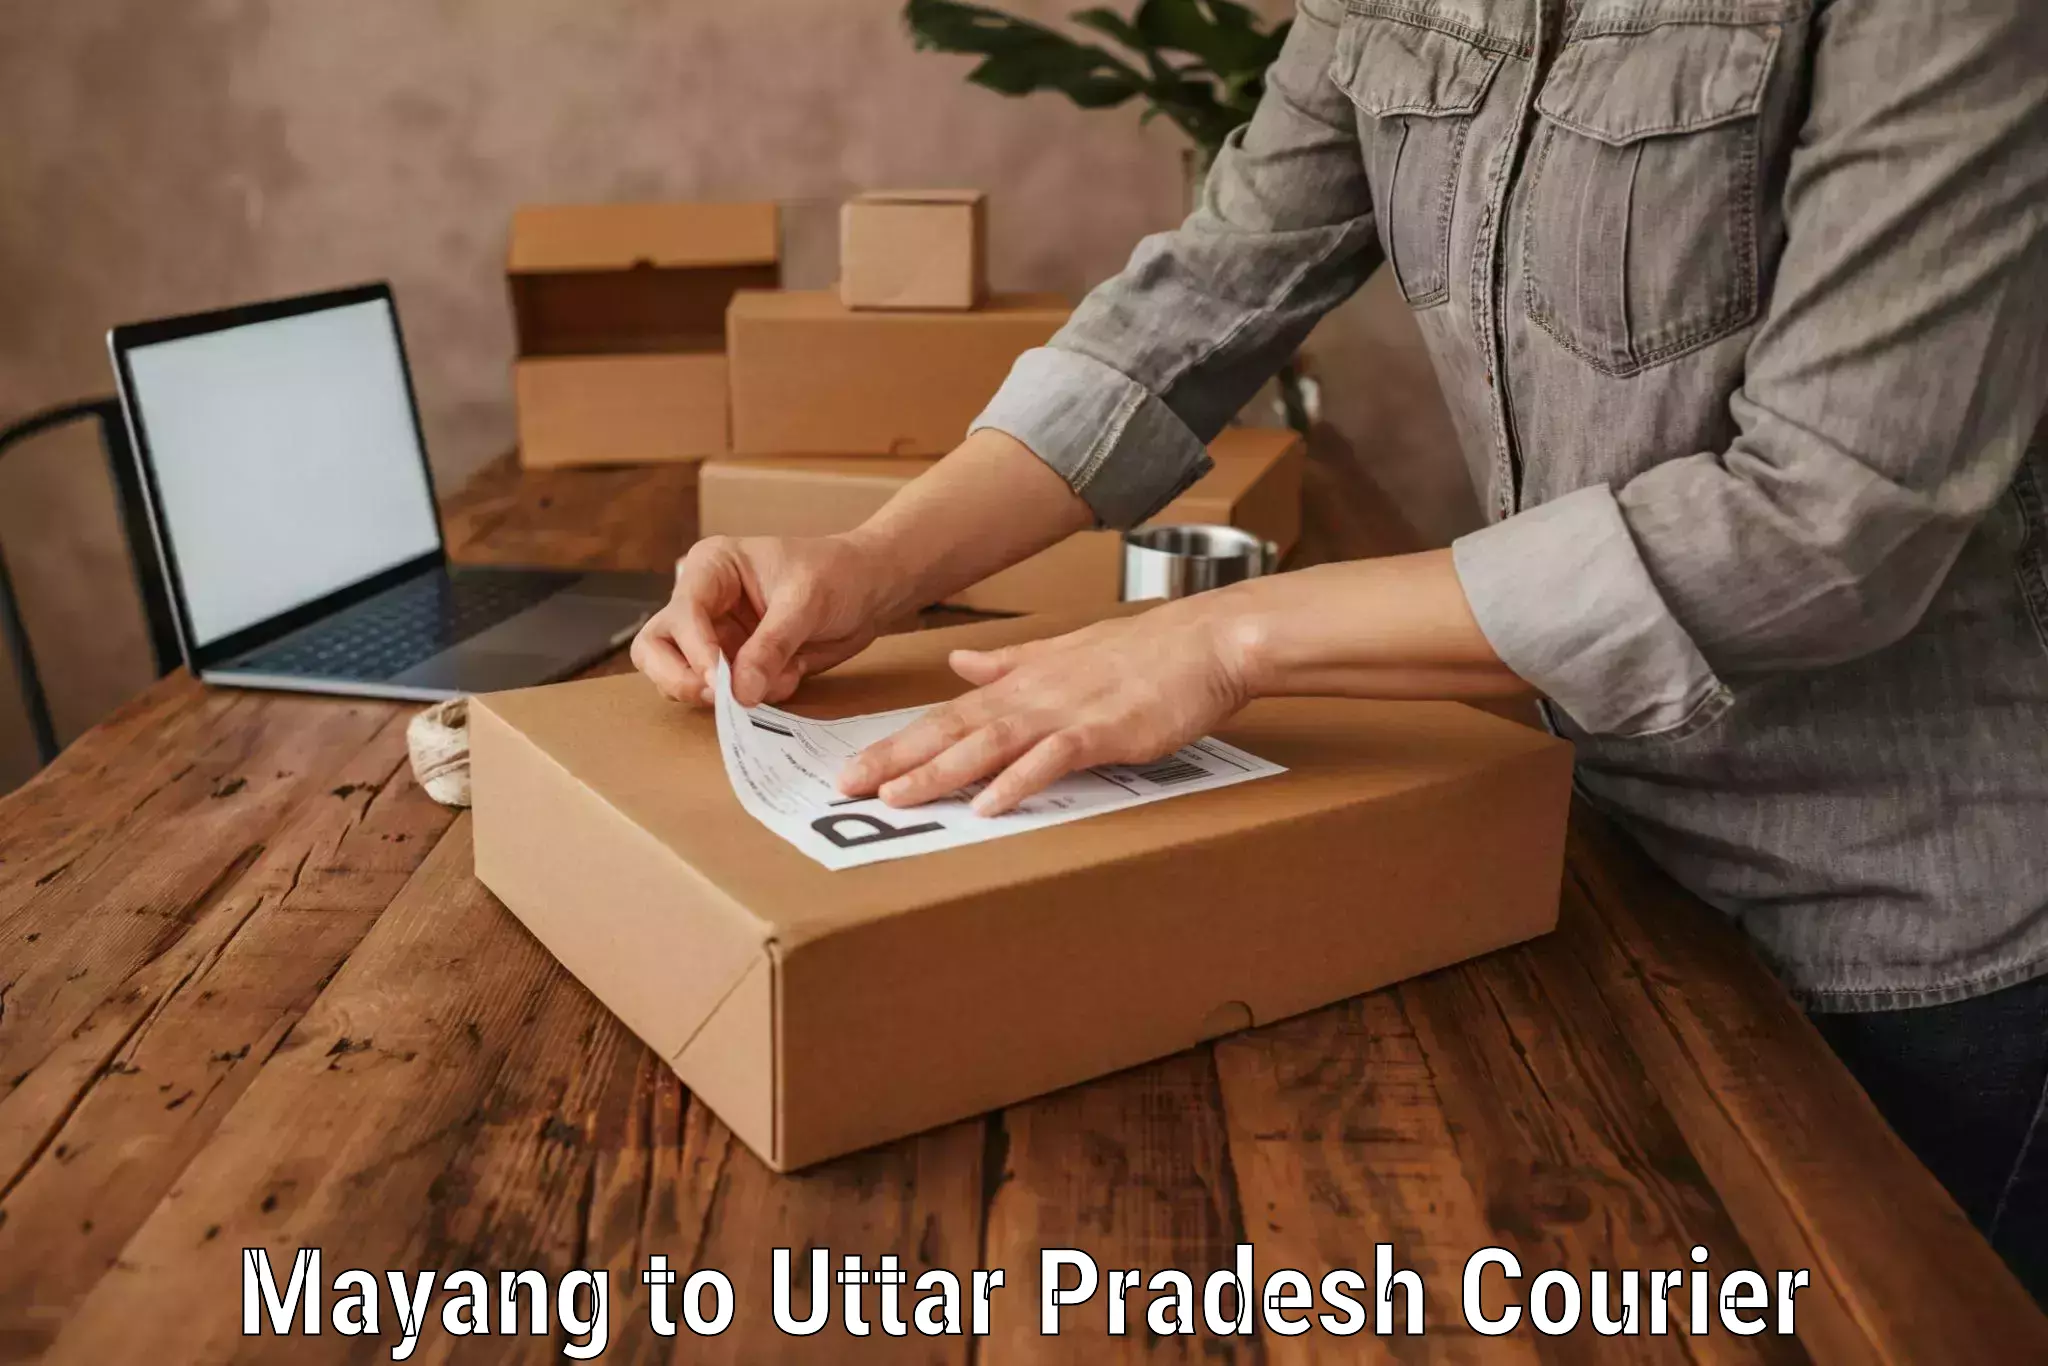 Express luggage delivery in Mayang to Uttar Pradesh